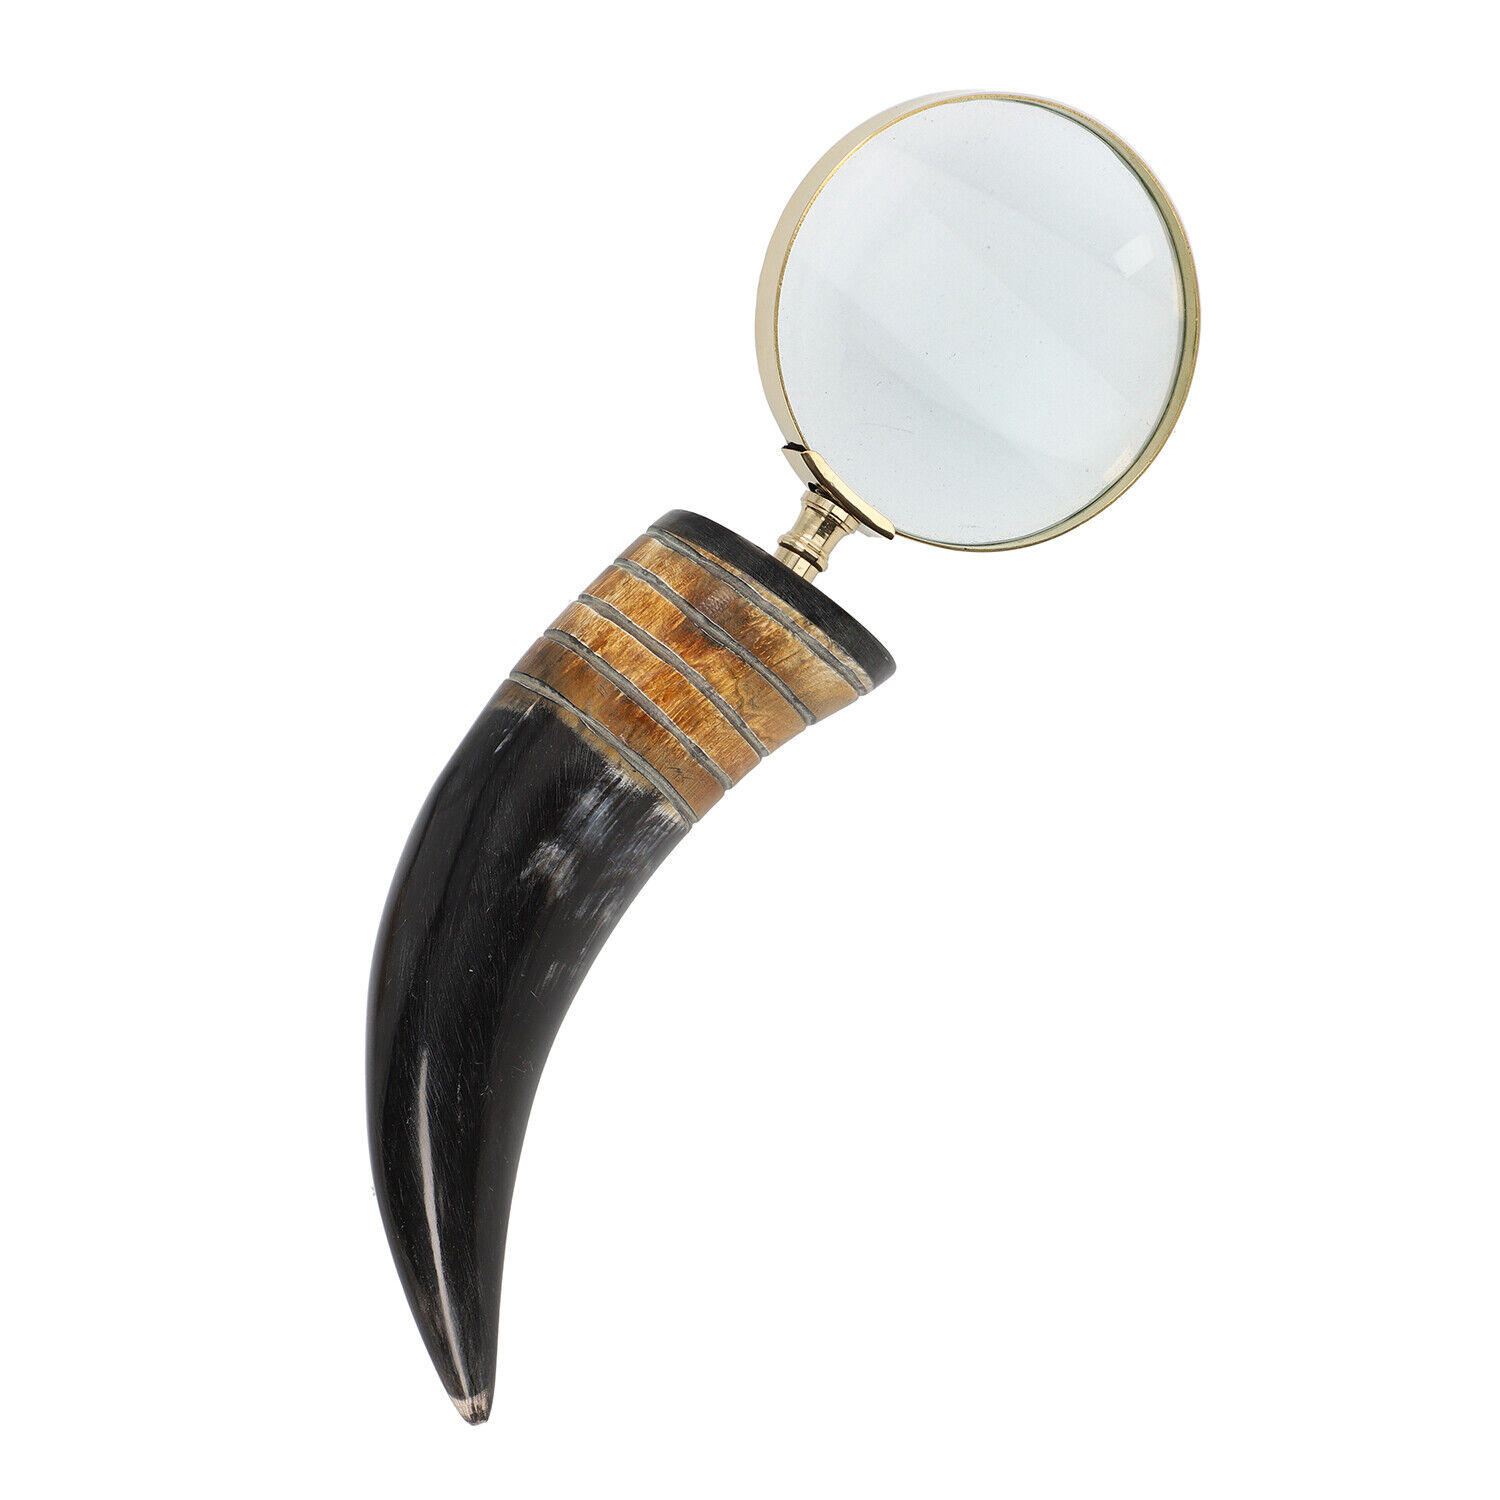 Handcrafted Magnifying Glass with Buffalo Horn Handle Jewelry for Women Gifts